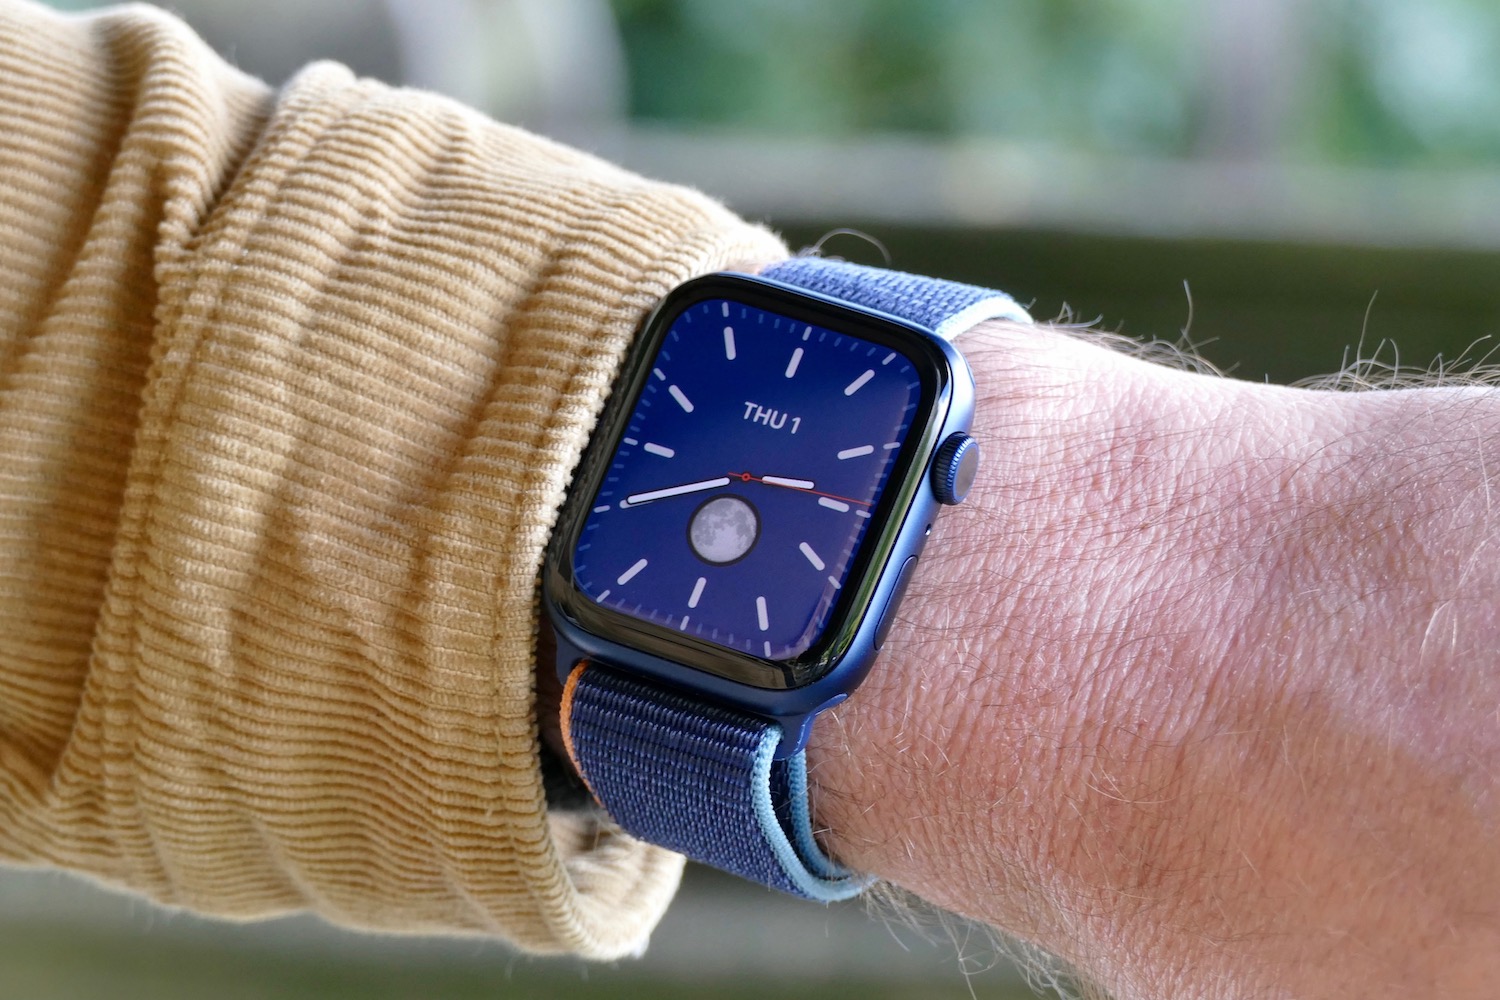 The Apple Watch Series 6 on the wrist.